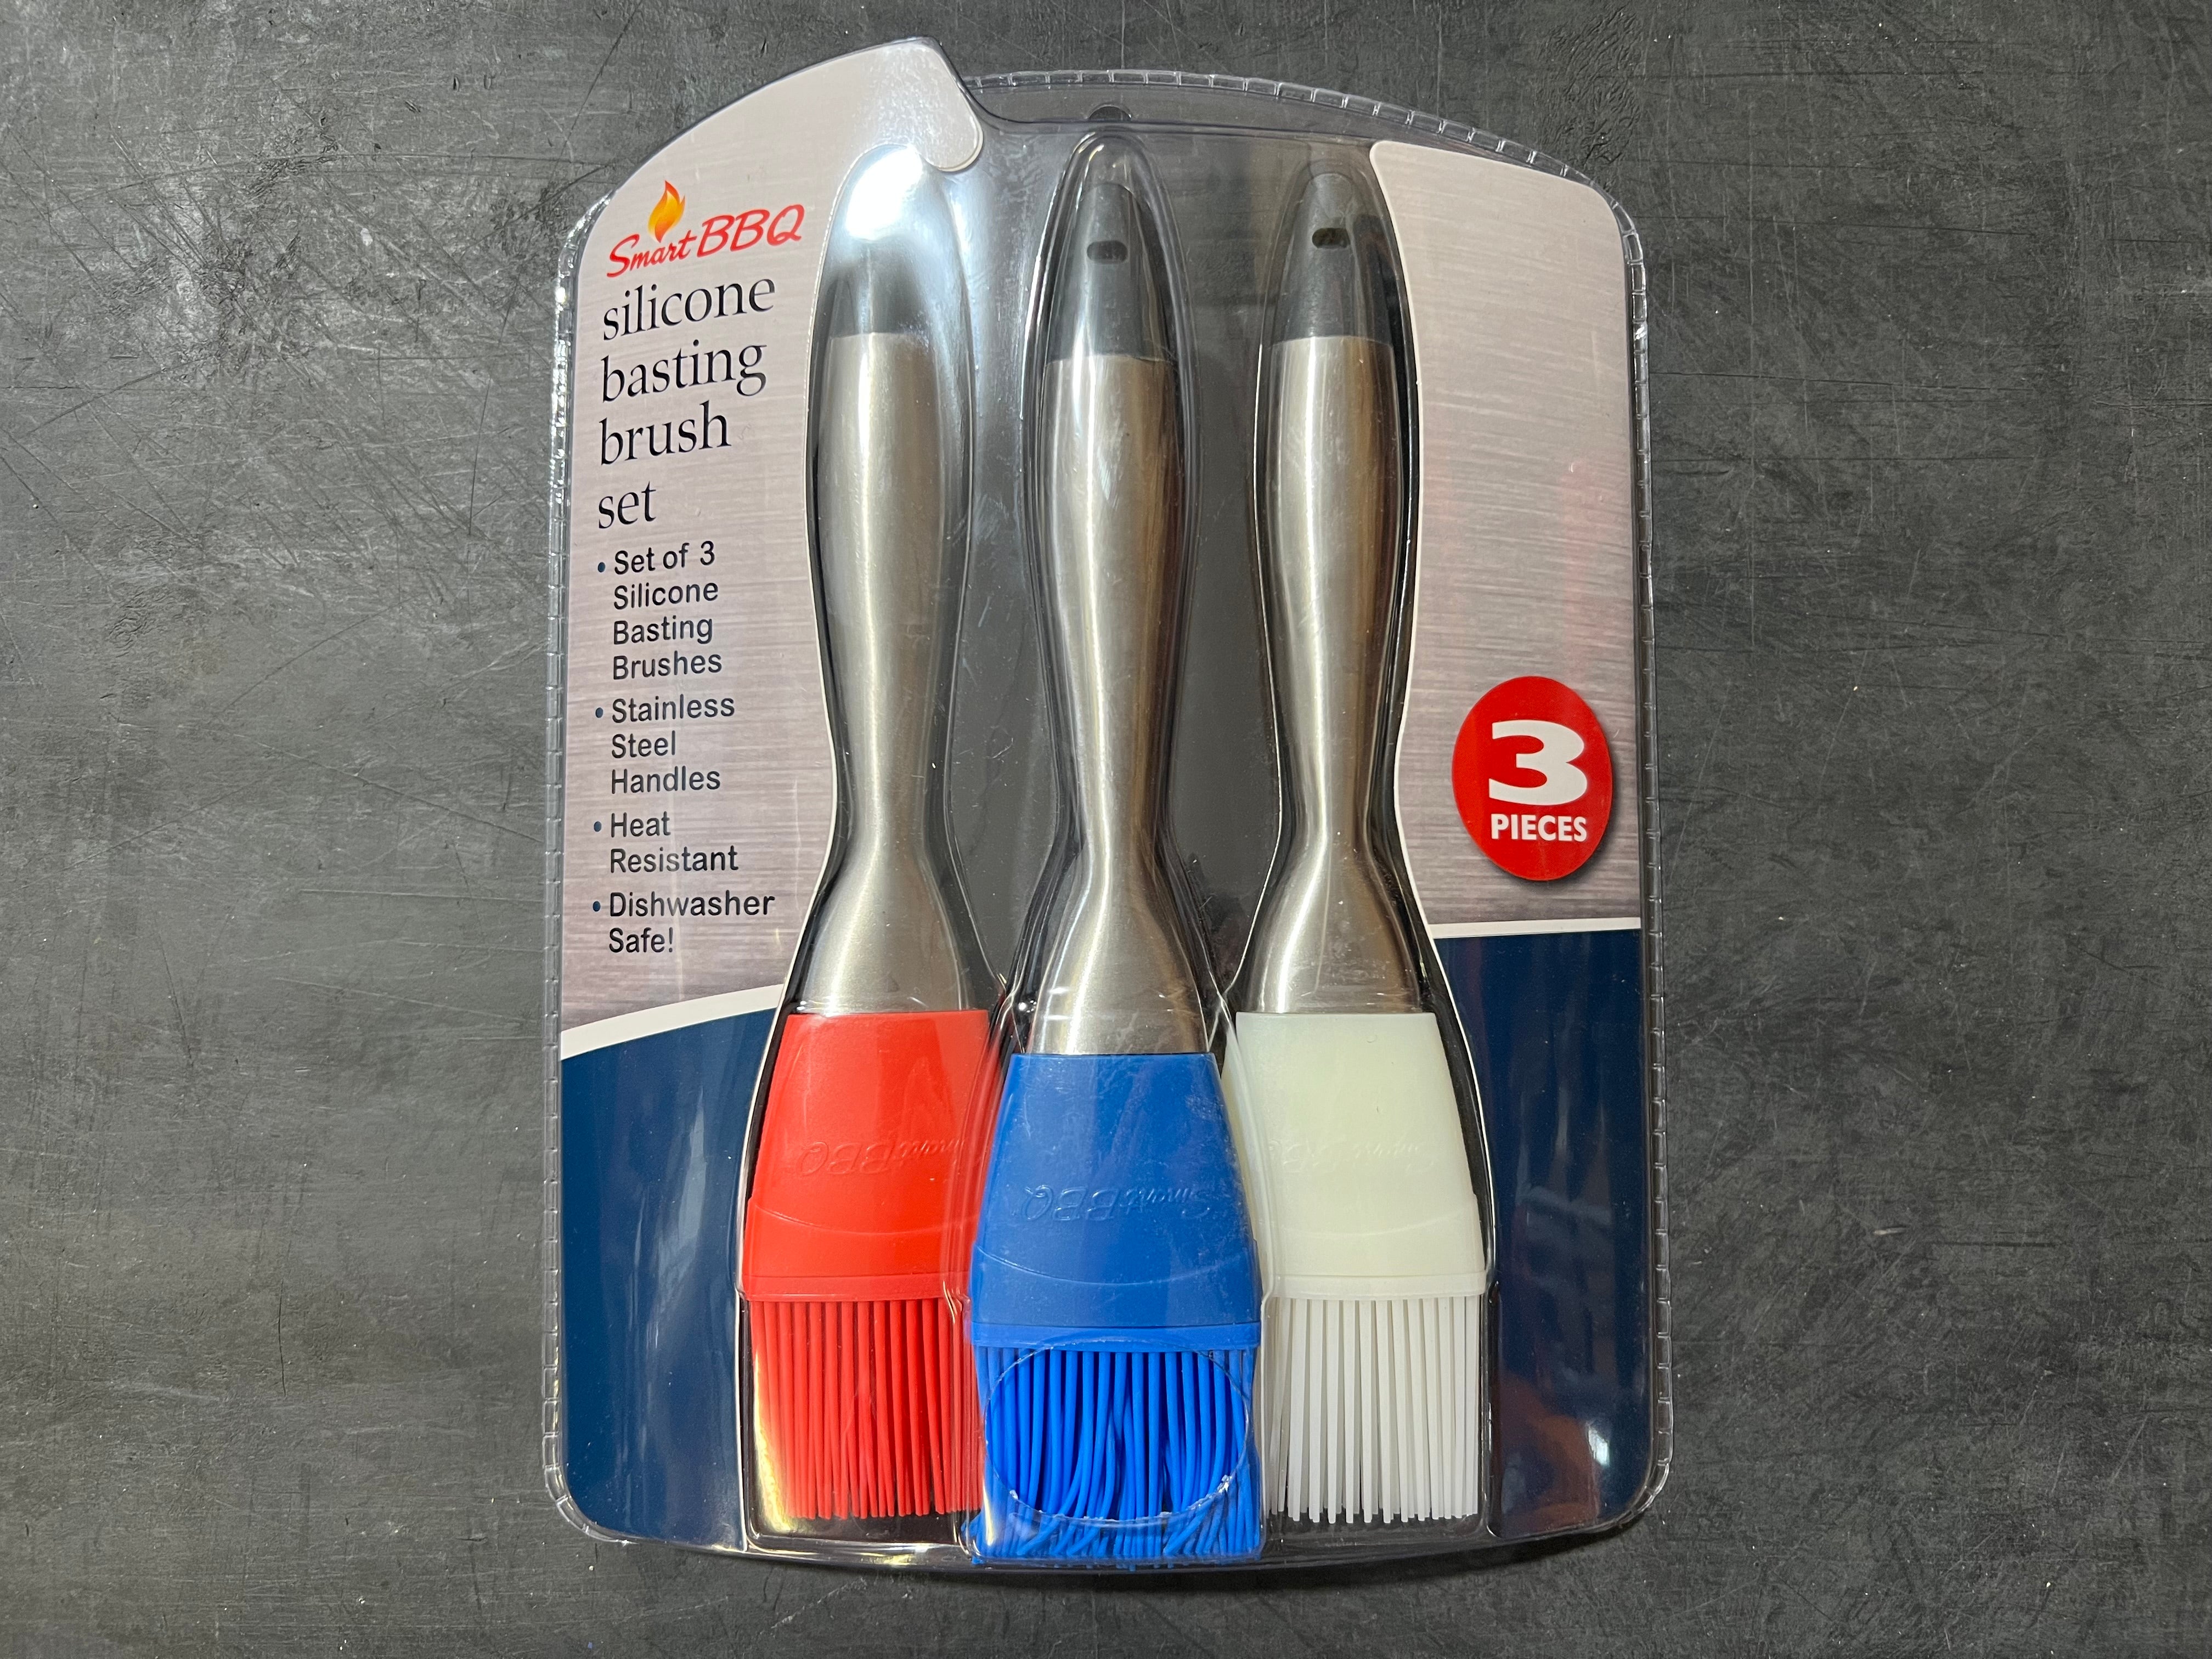 Smart BBQ SBQ-8897-CT Stainless Steel Handle 3pc.Silicone Basting Brus